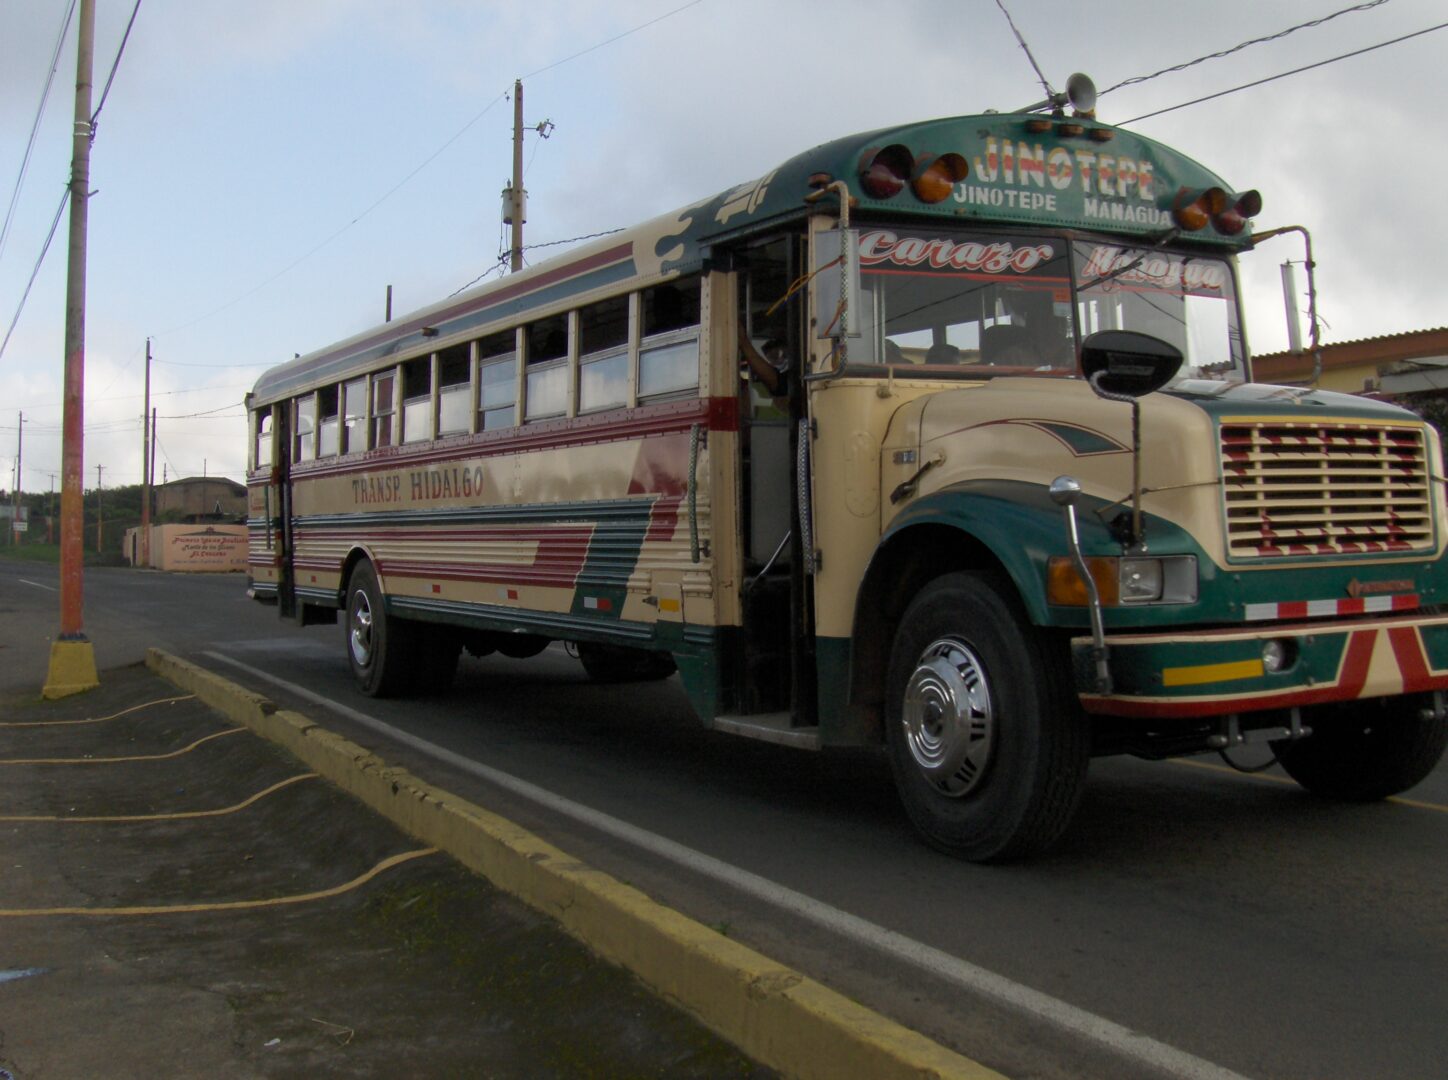 A Vintage Bus in Yellow Color With Green Details